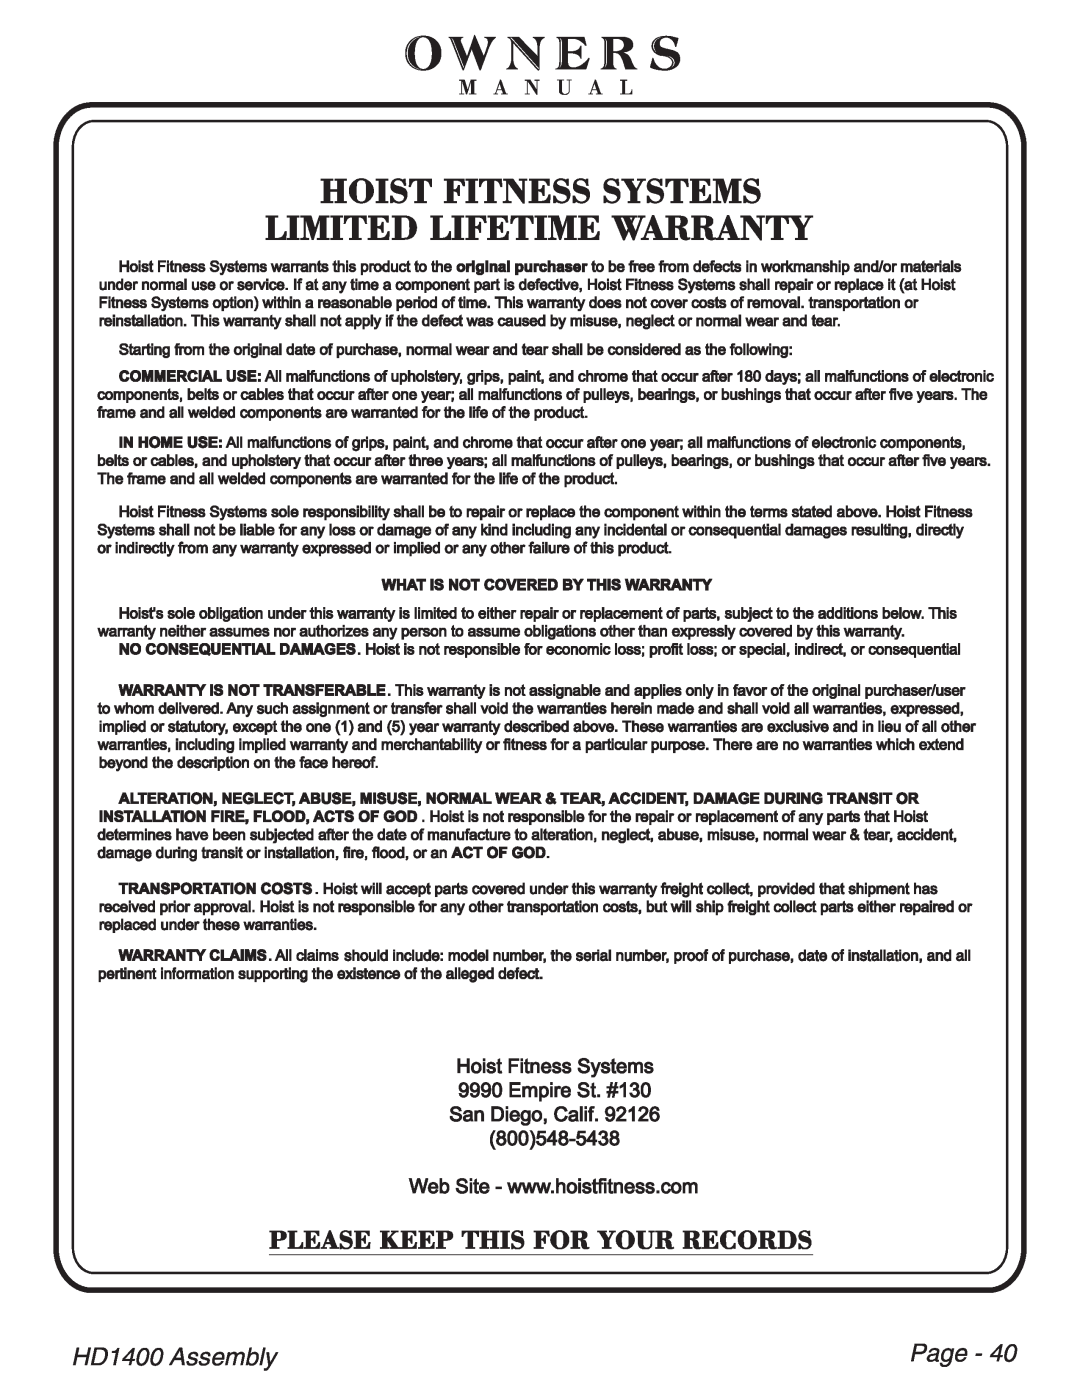 Hoist Fitness HDI400 Owners, Hoist Fitness Systems Limited Lifetime Warranty, HD1400 Assembly, Page, M A N U A L 